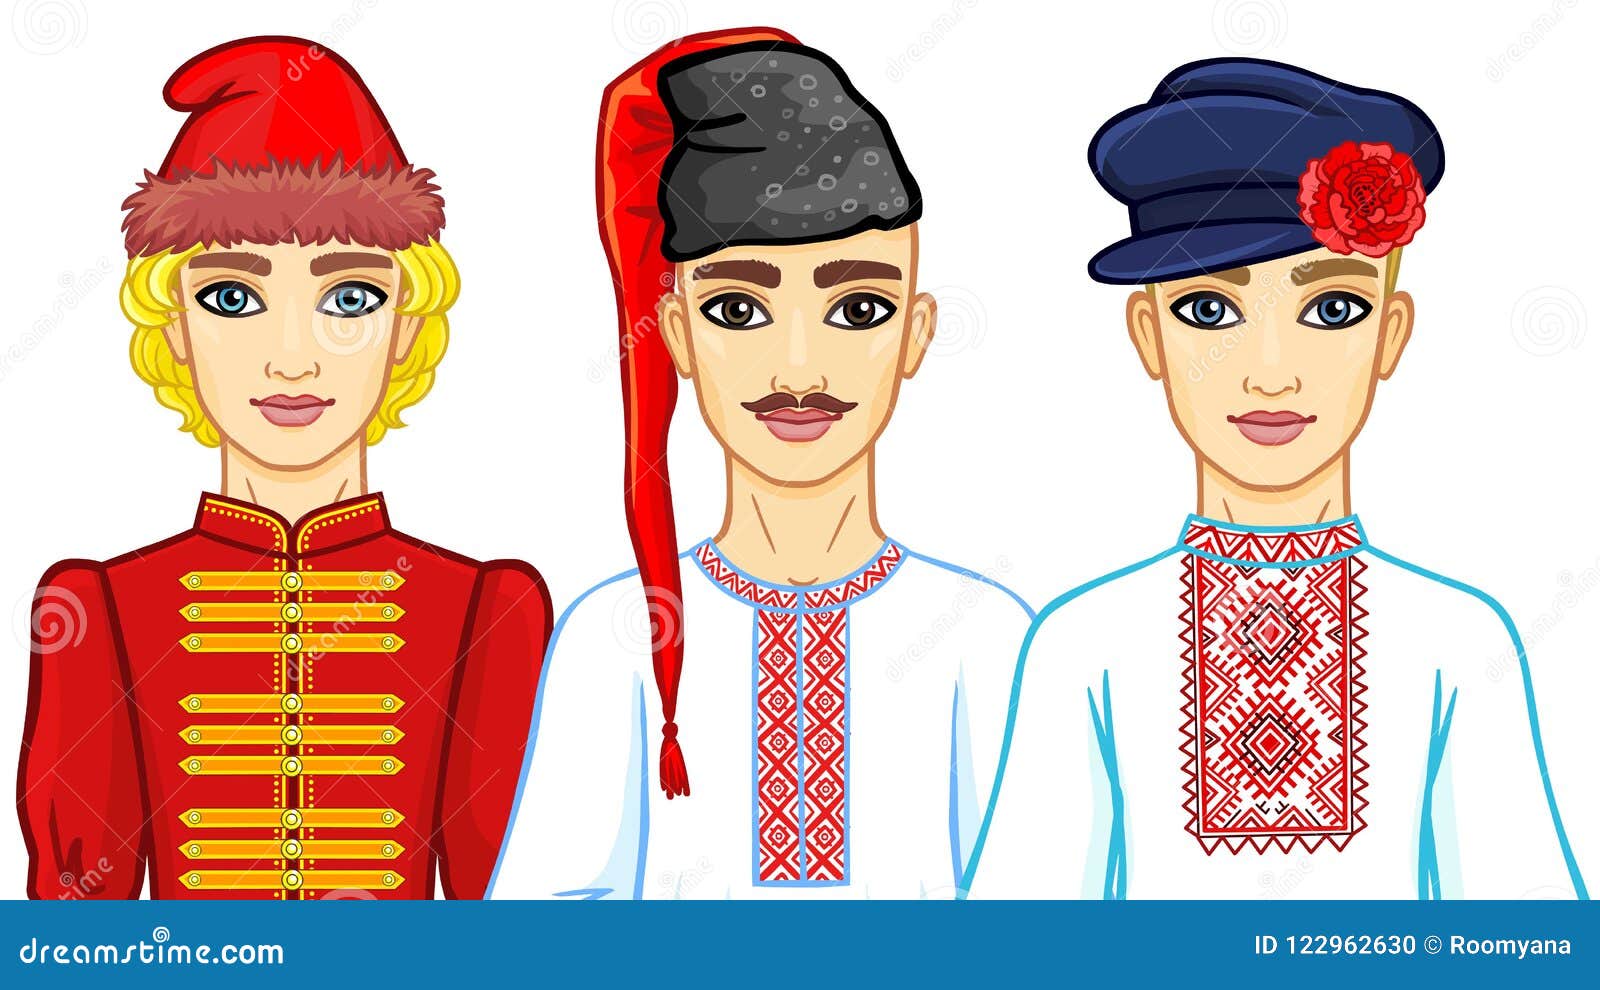 set of animation portraits of slavic men in traditional clothes. belarus, ukraine, russia.